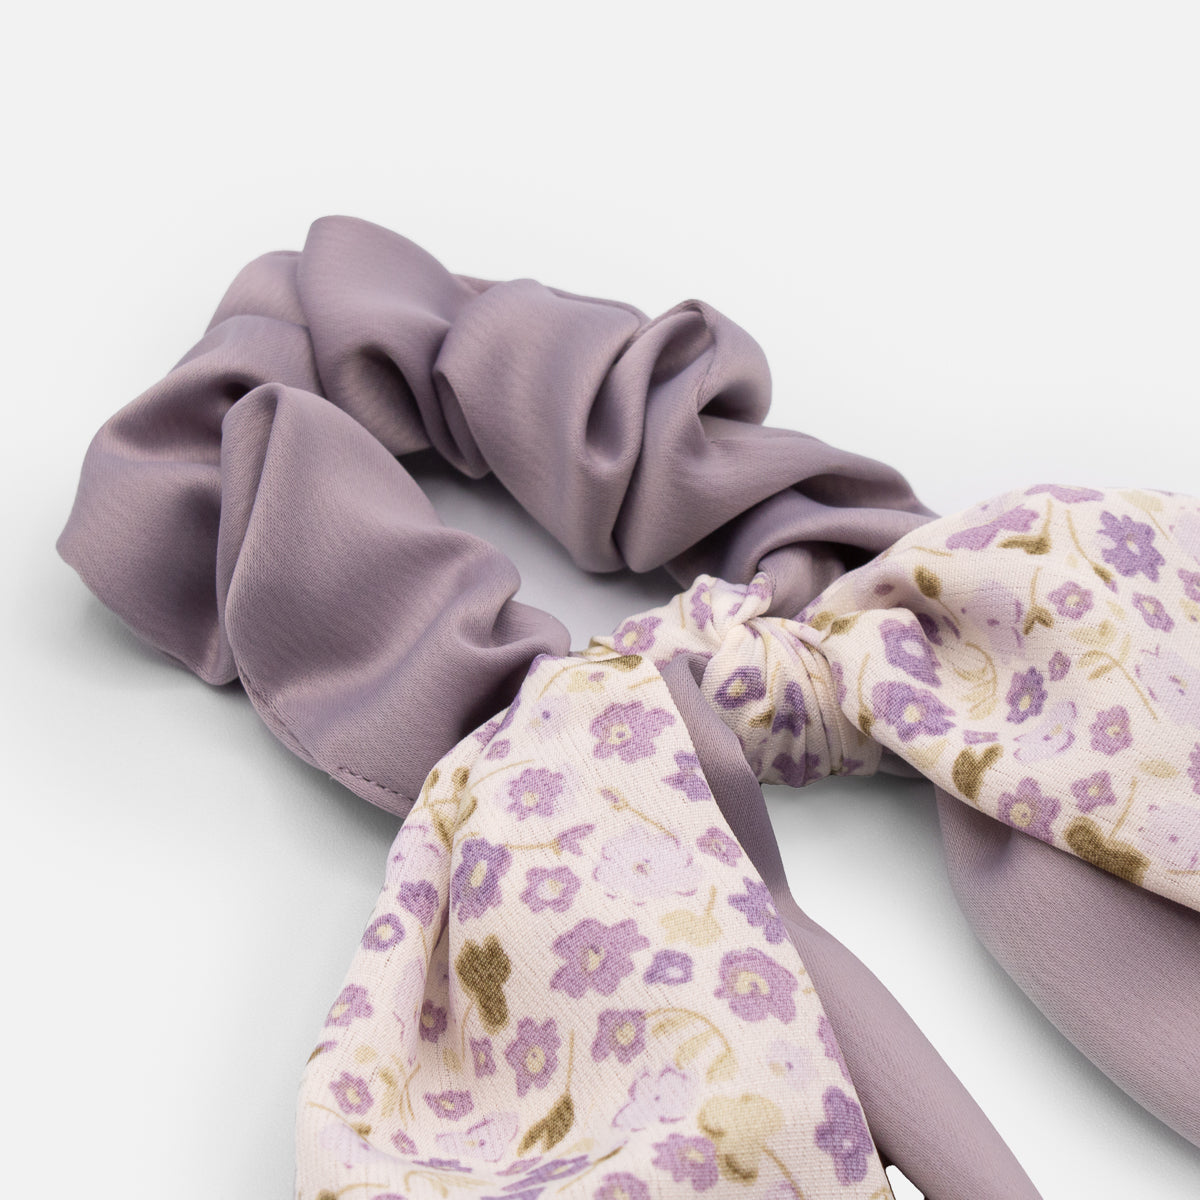 Lilac scrunchie with floral bow